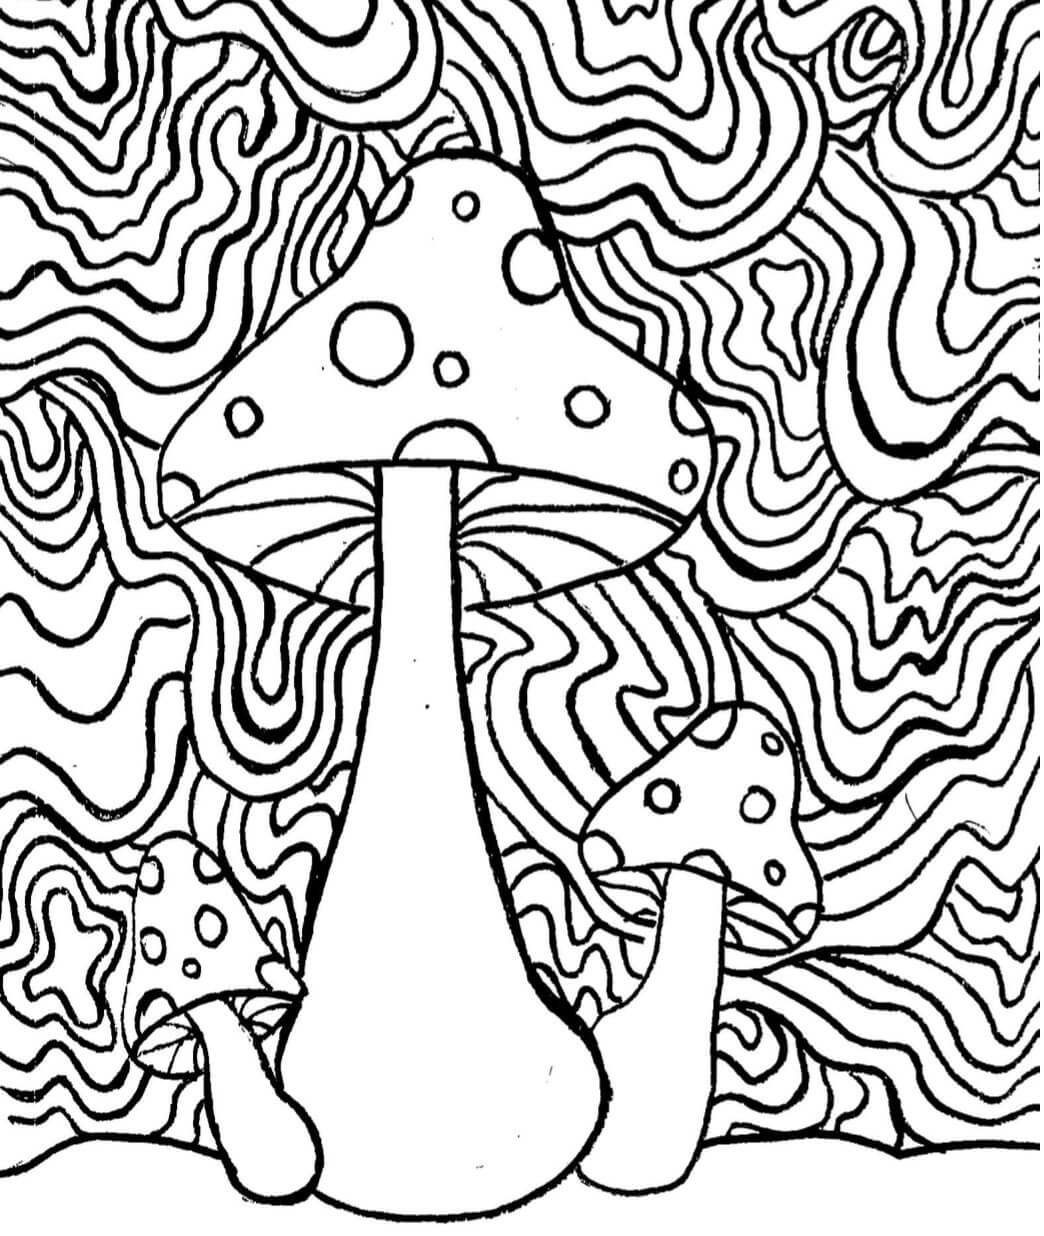 Three mushrooms trippy coloring page